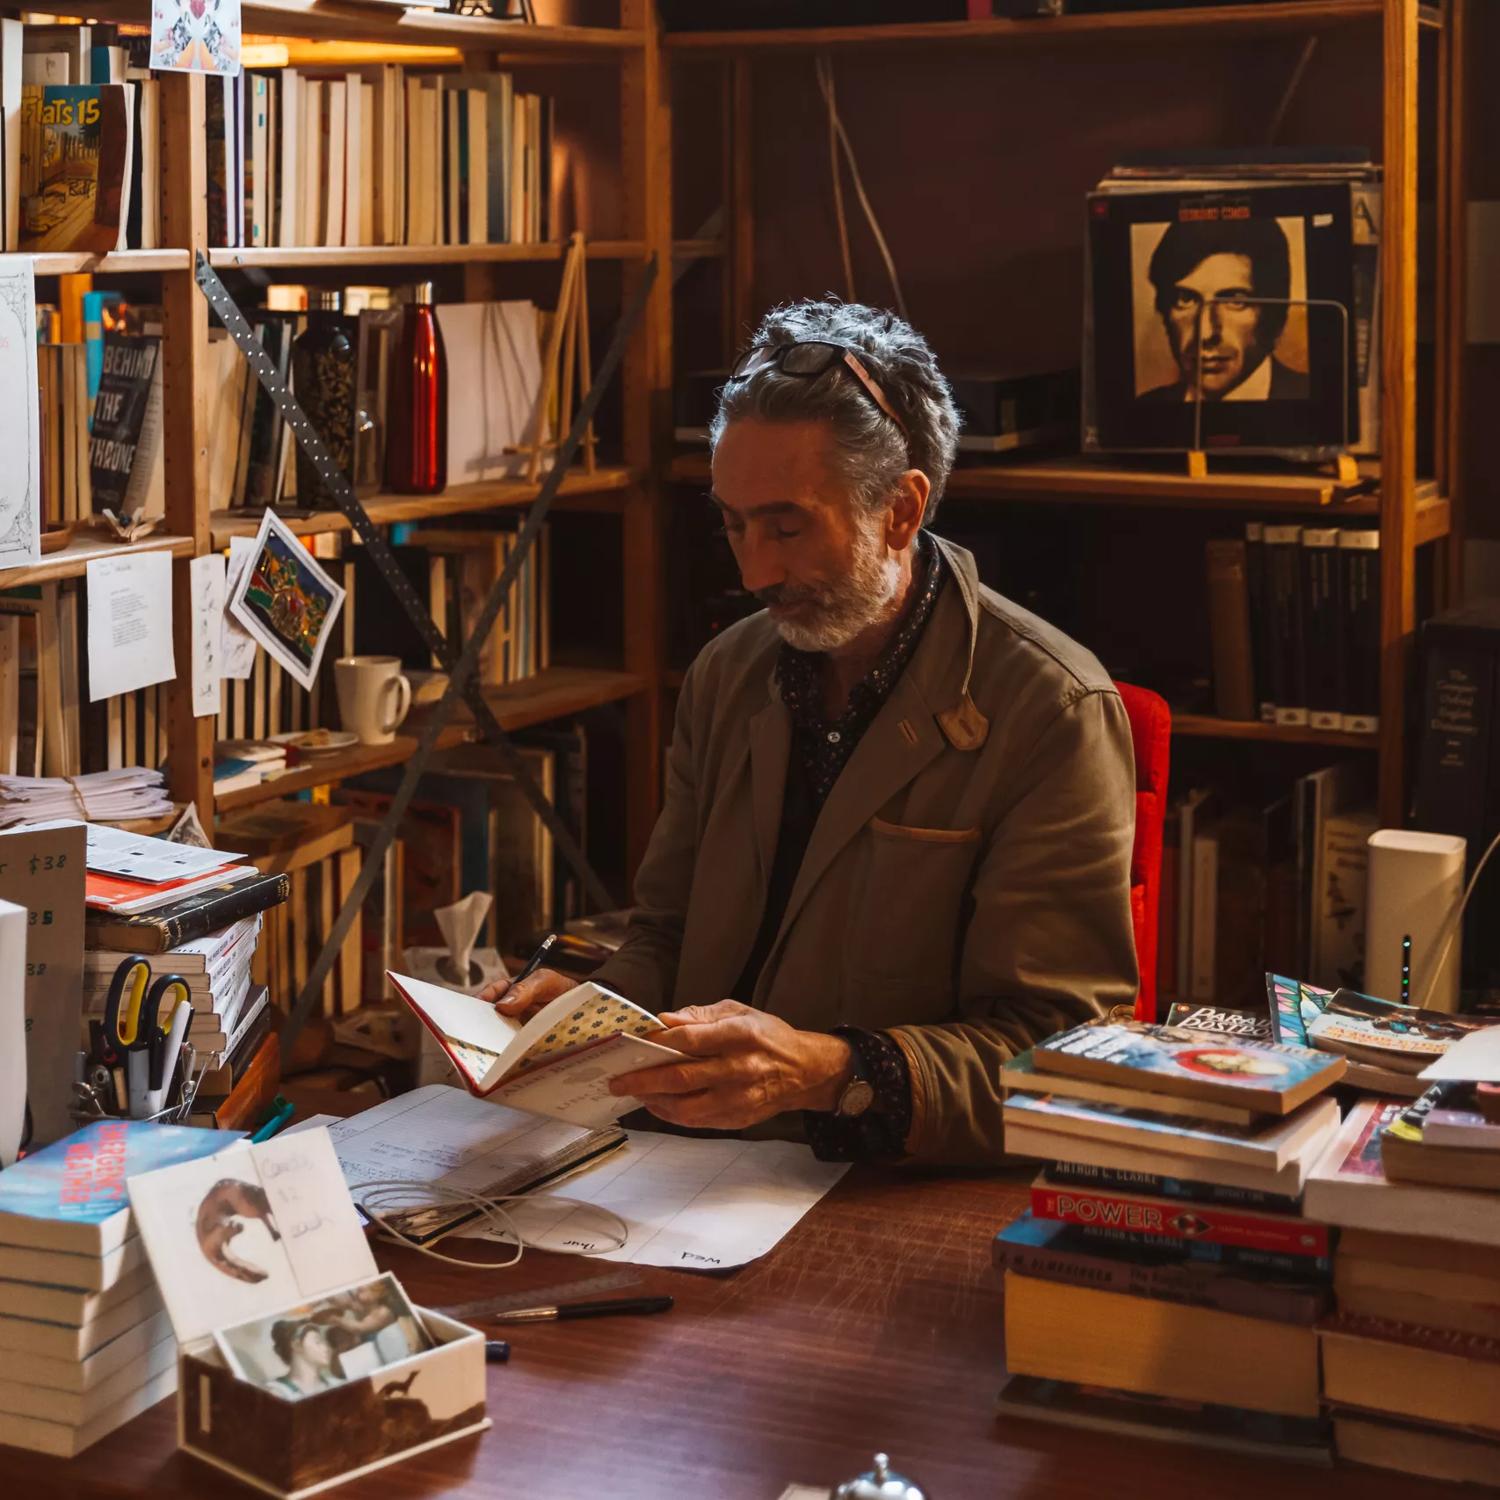 A person sits behind a desk looking at a book, while surrounded by piles and shelves of books in The Undercurrent bookstore.